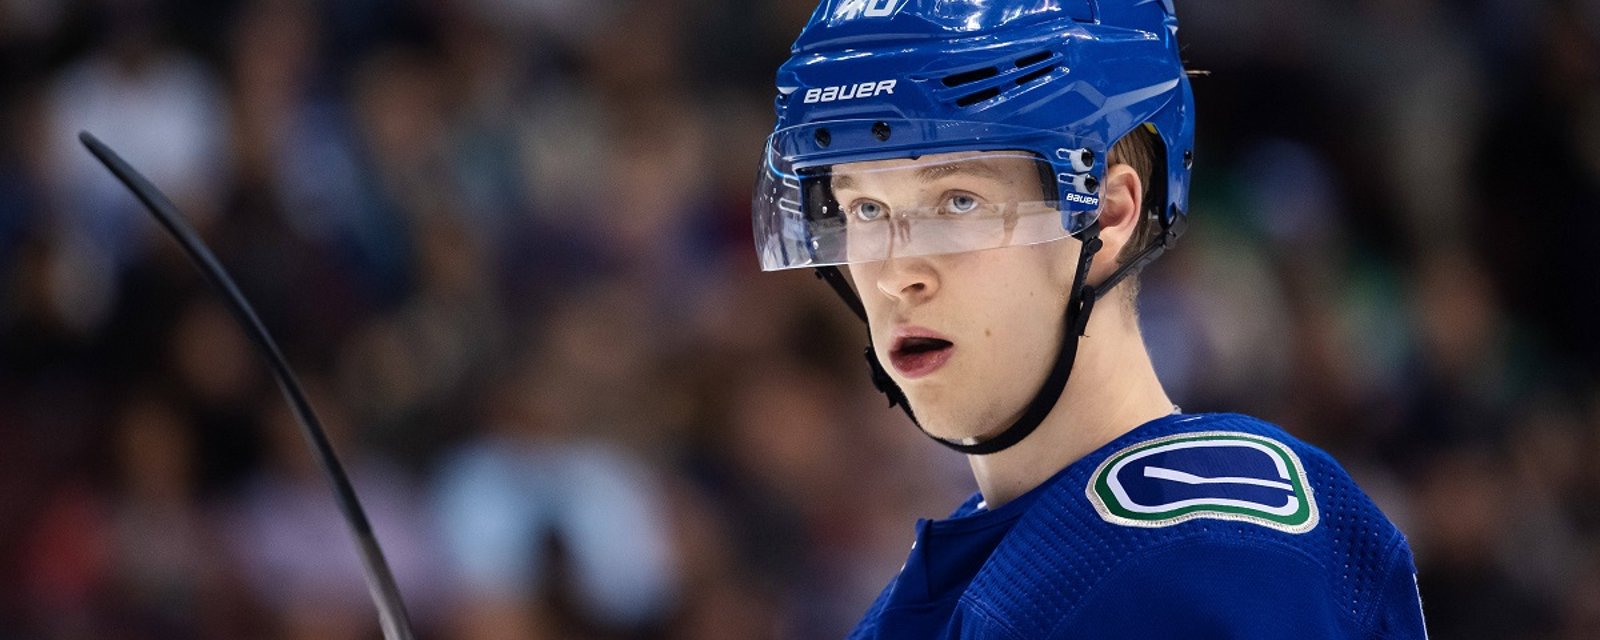 Rookie superstar Elias Pettersson on the verge of passing an NHL legend.